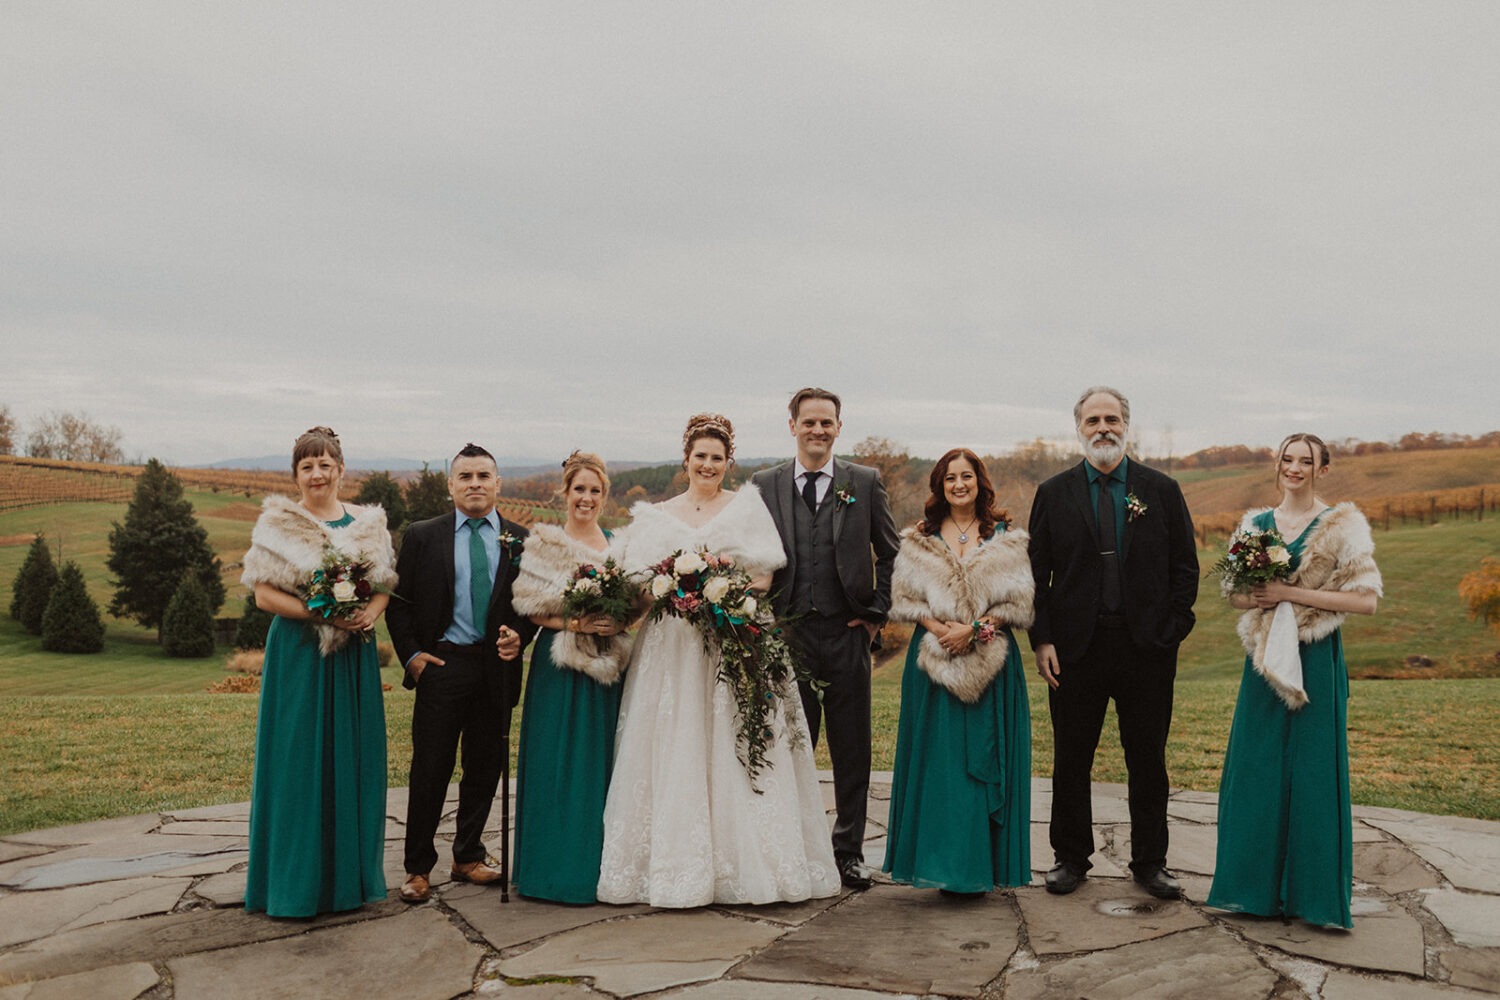 couple stands with wedding party at outdoor wedding venue 